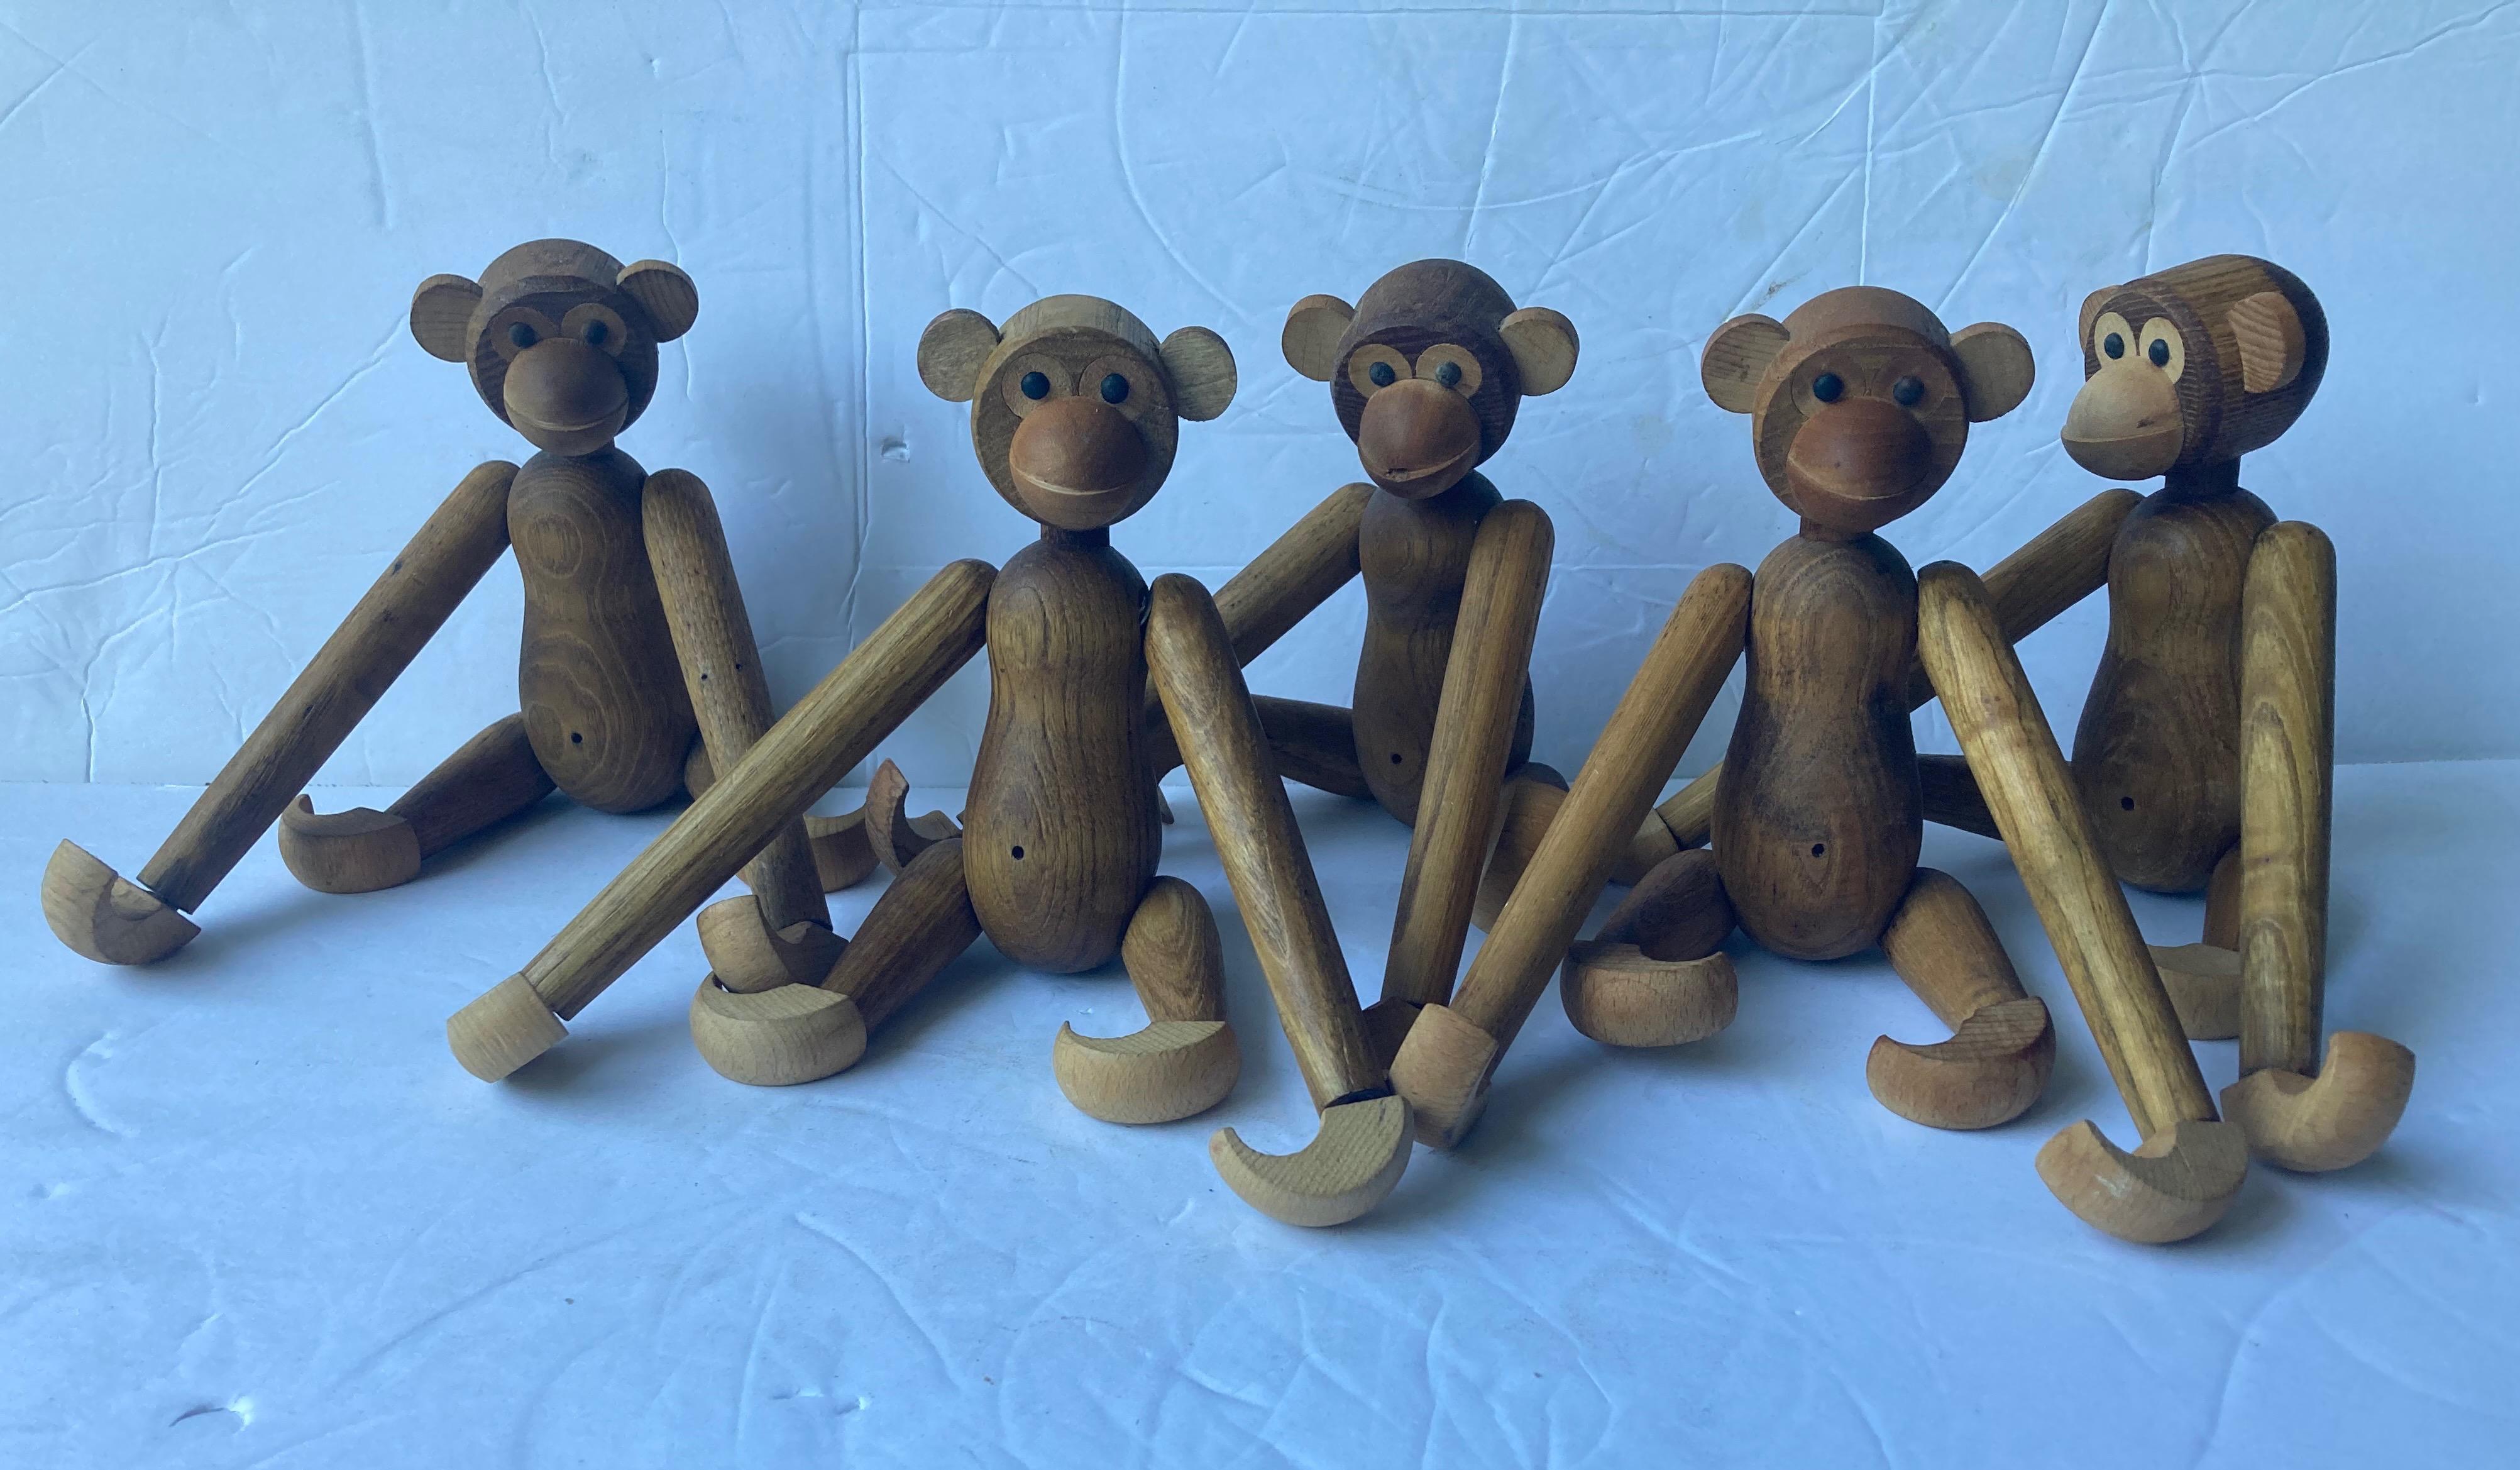 So cute small collection of toys/sculptures of monkeys in wood. These pieces were made in Japan in the style of Kay Bojesen.